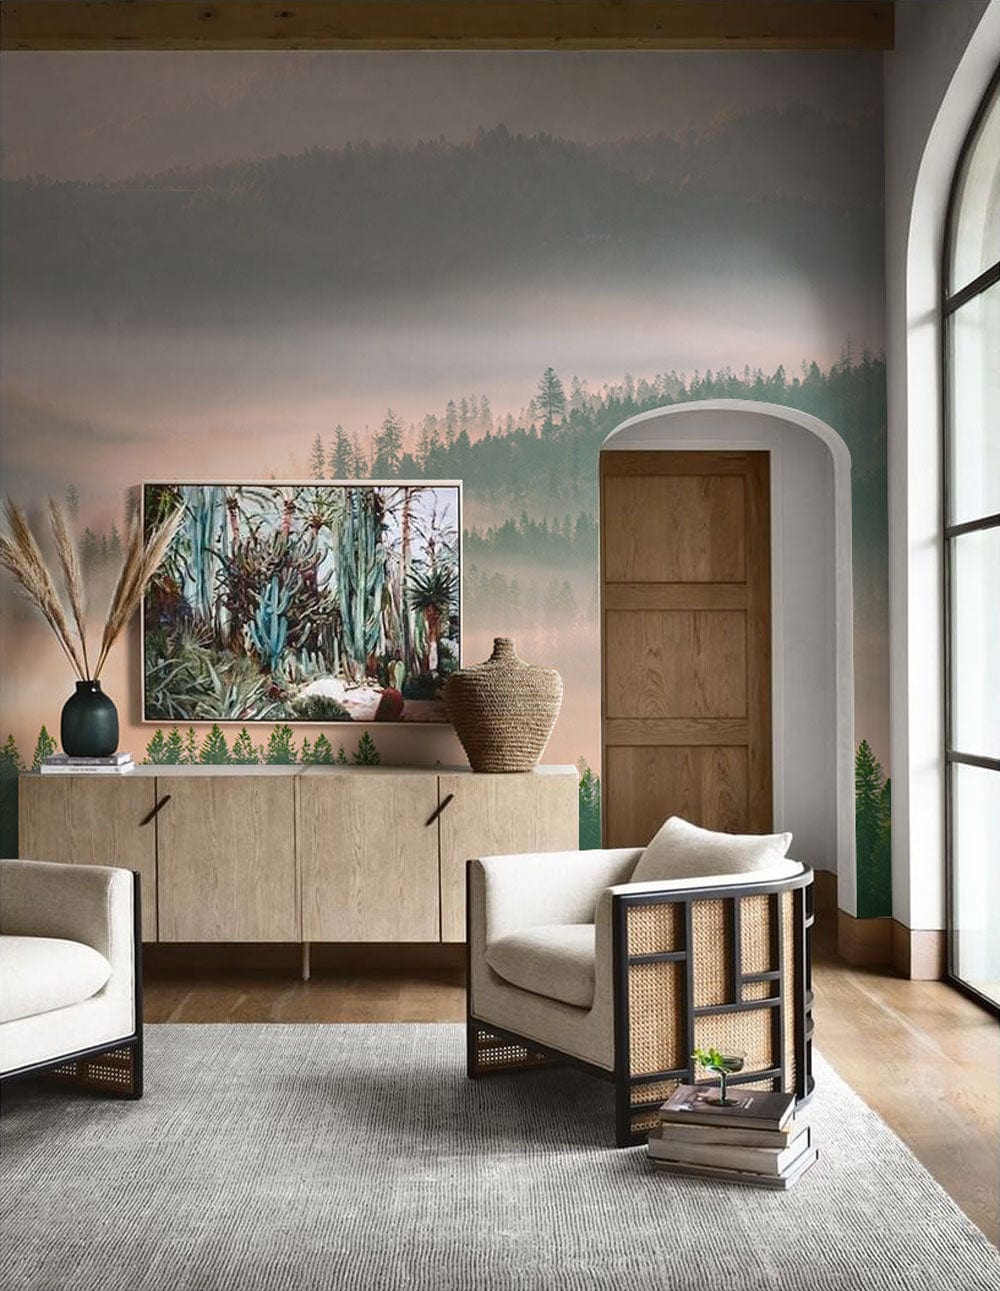 Wallpaper mural featuring a misty forest view, ideal for adorning the living room